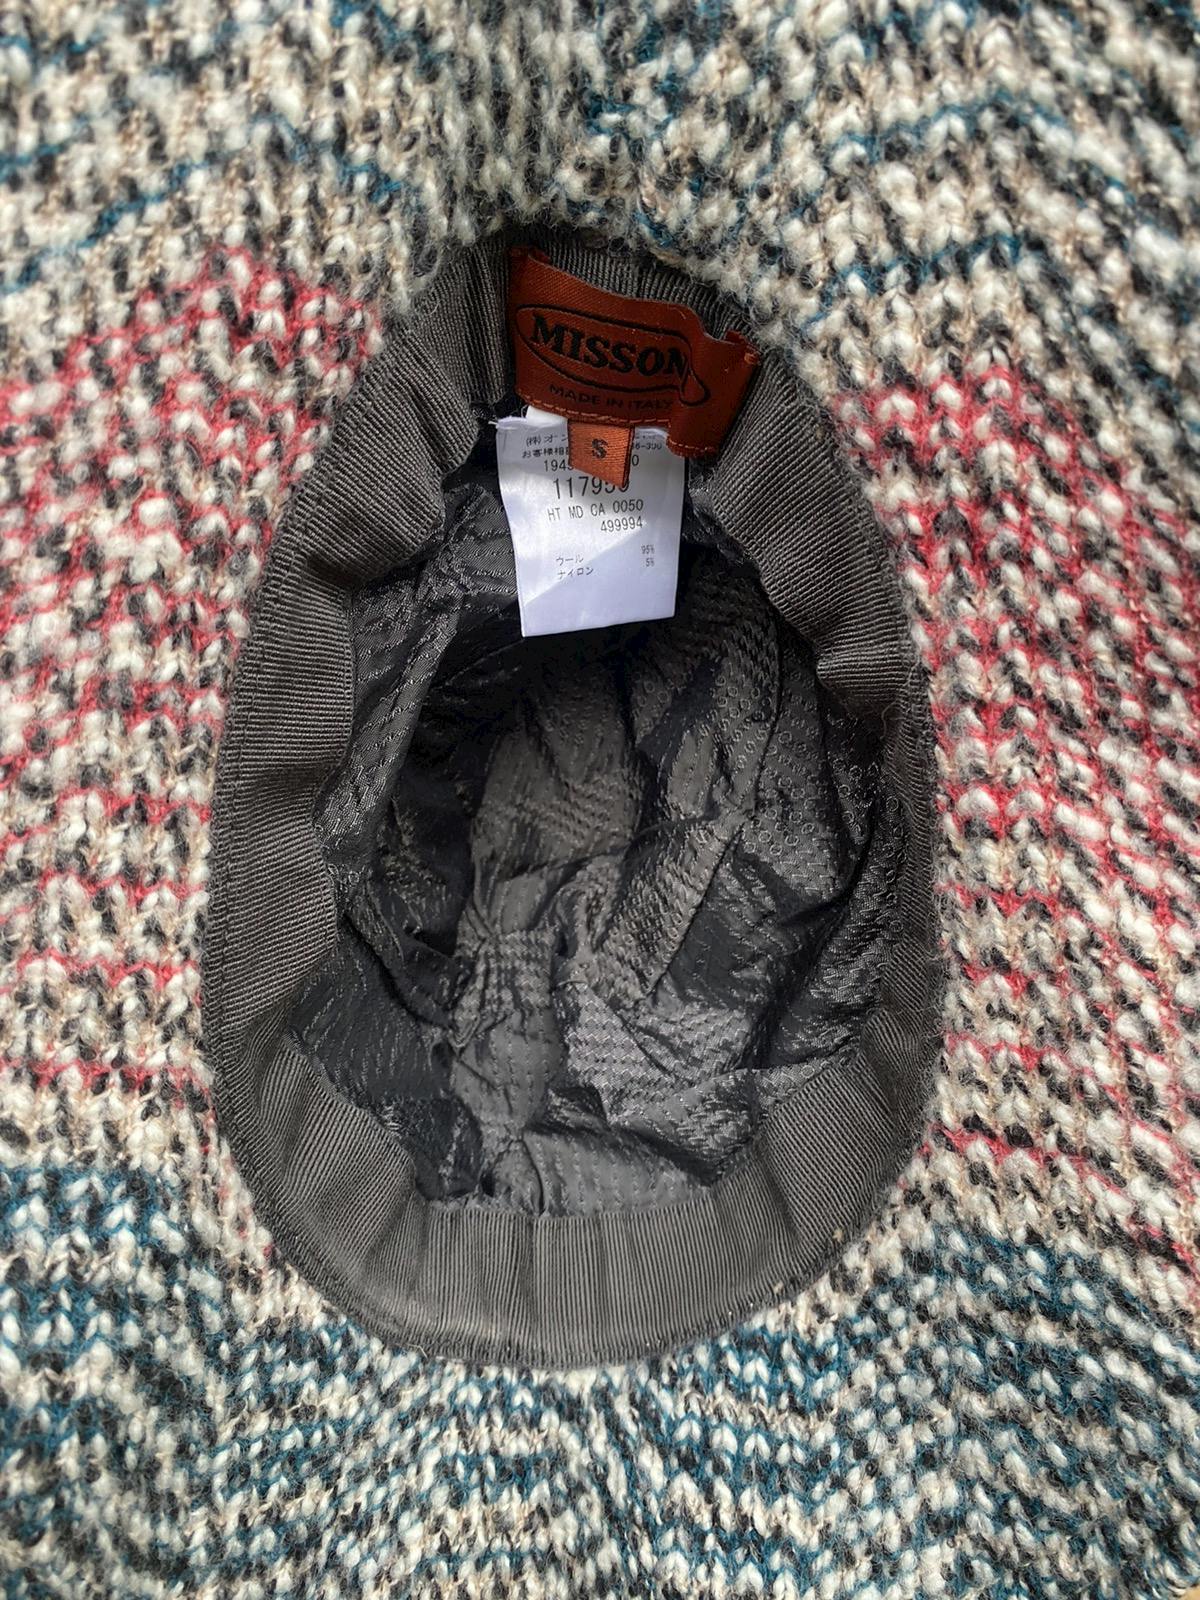 Vintage Missoni Hat Made in Italy - 7